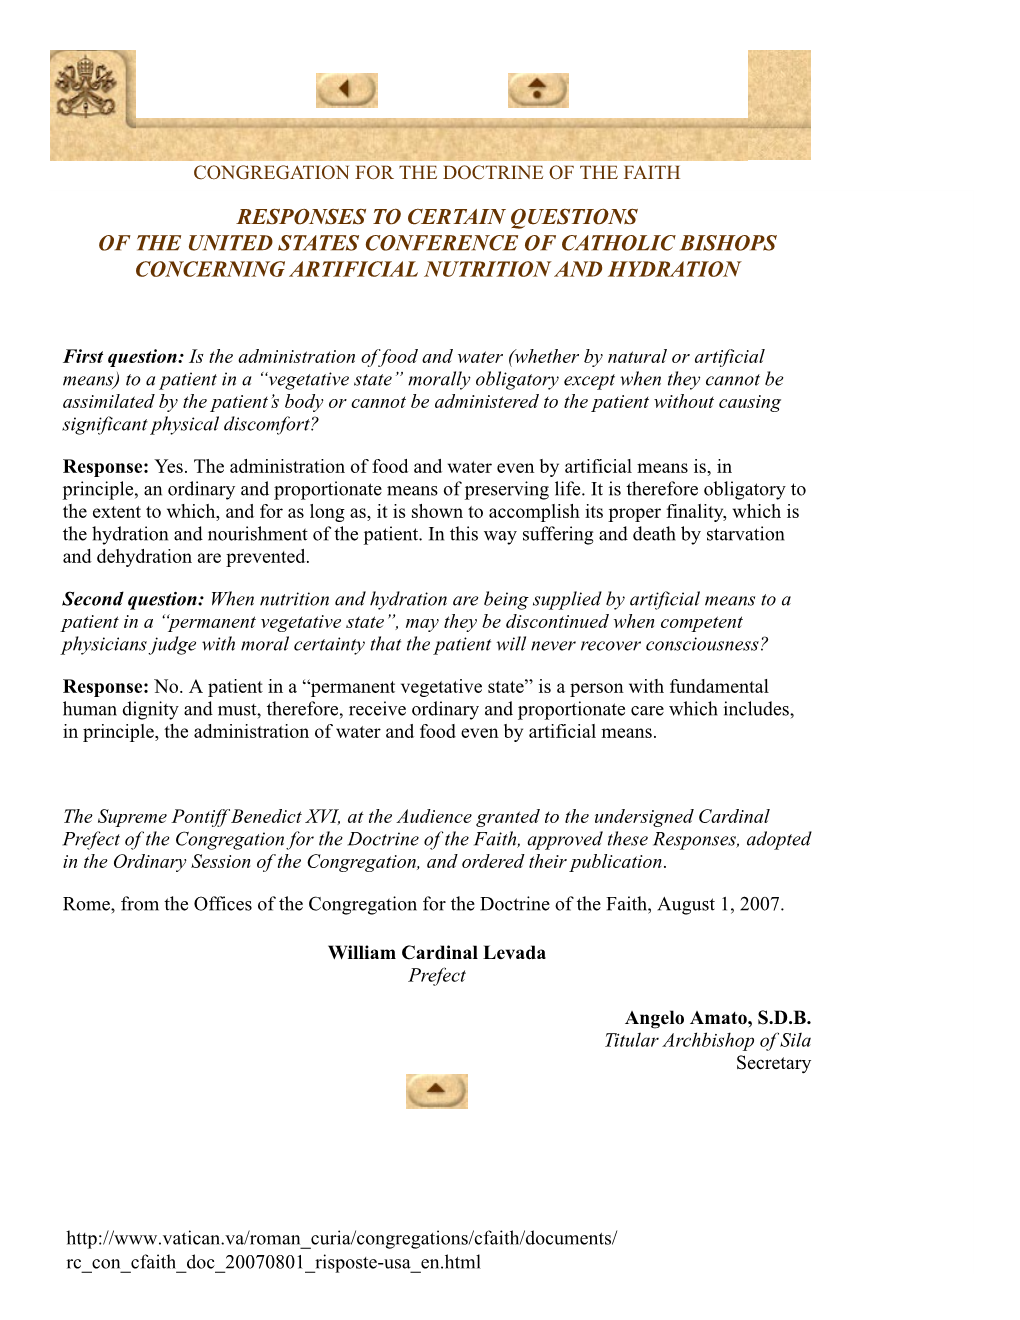 Responses to Certain Questions of the United States Conference of Catholic Bishops Concerning Artificial Nutrition and Hydration